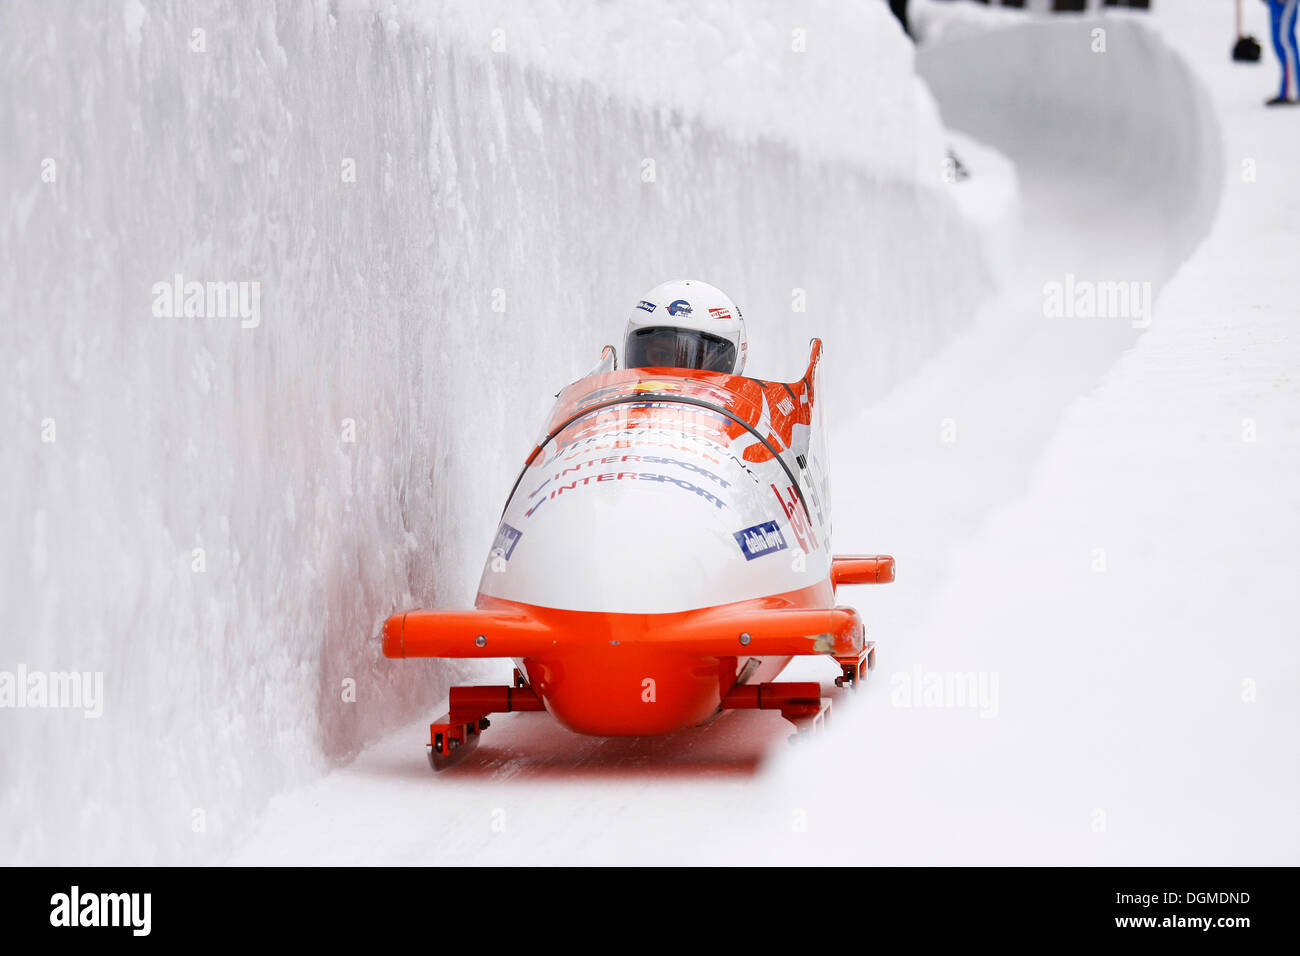 Two-man bobsled, natural ice rink, World Cup St. Moritz 2010, Engadin, Switzerland, Europe Stock Photo